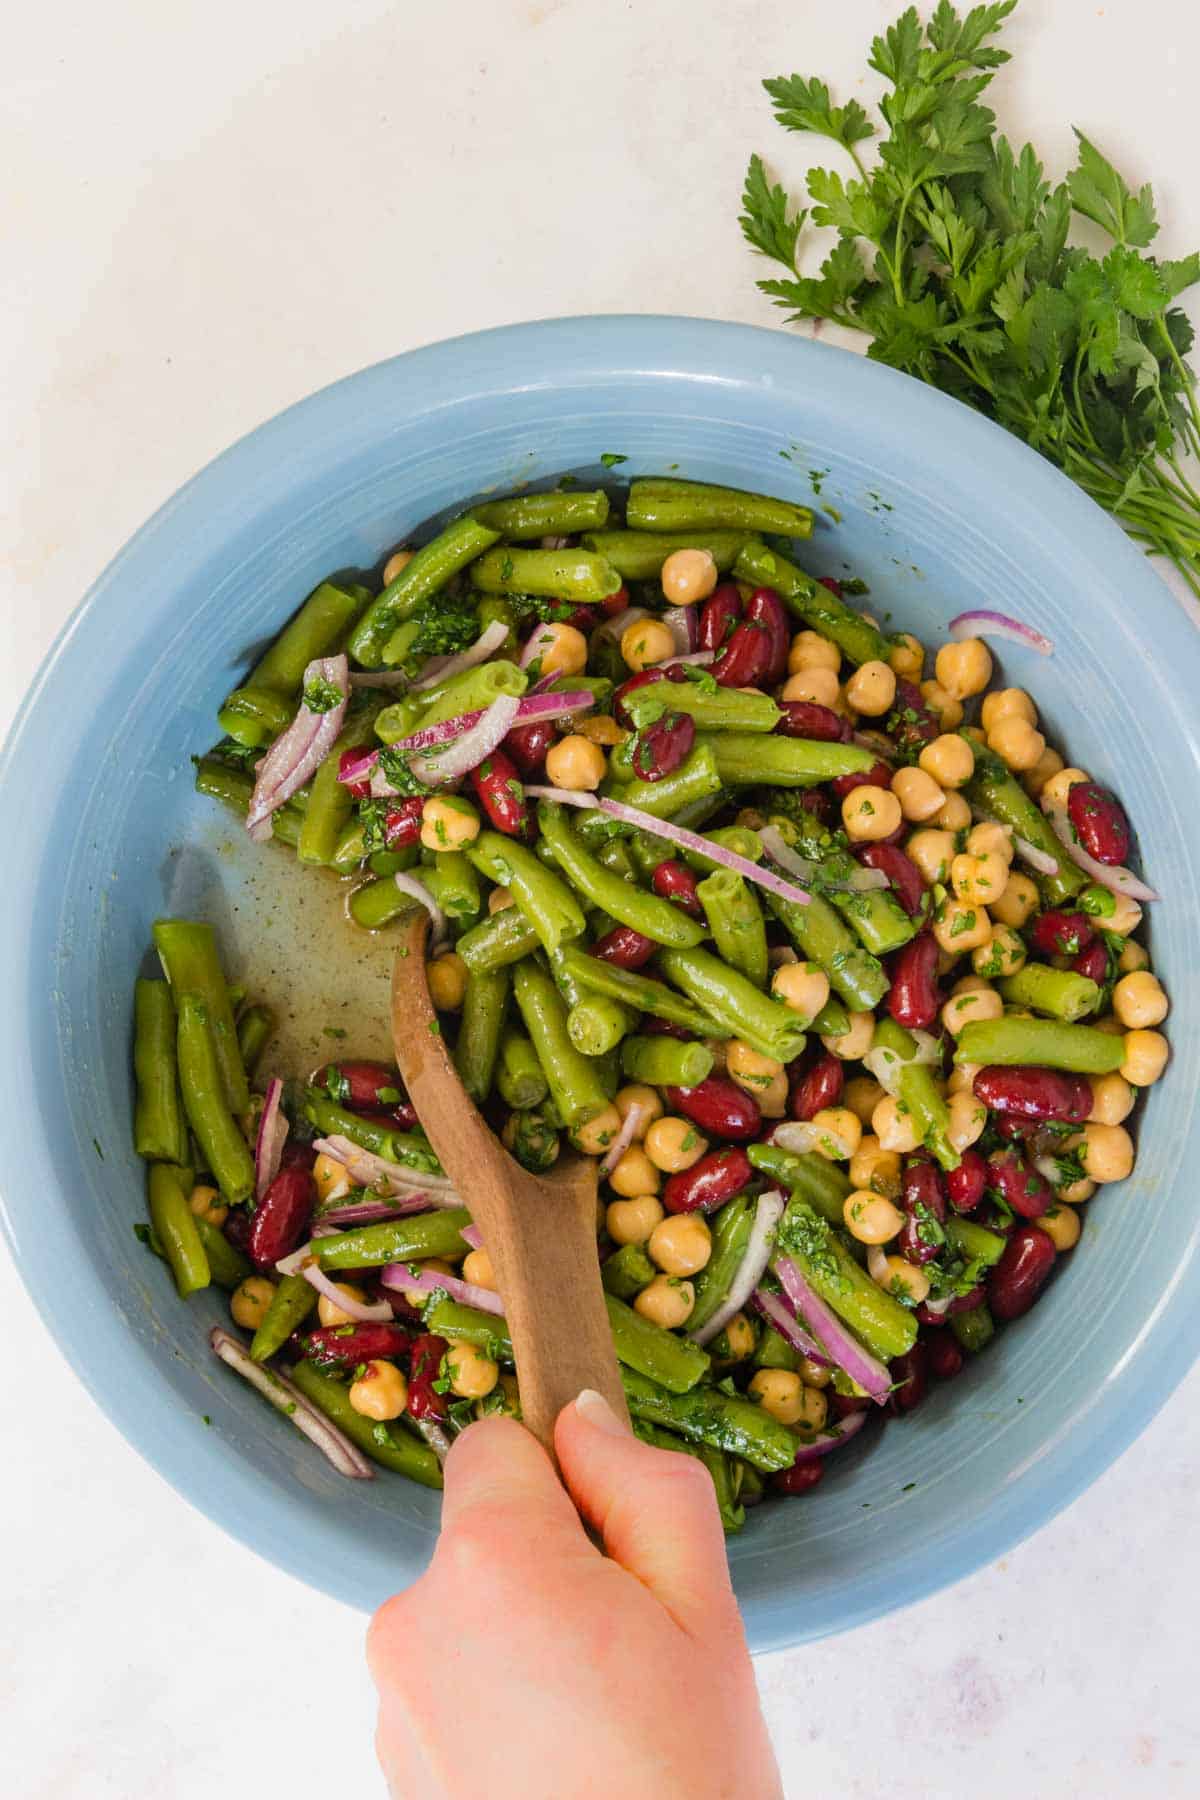 A wooden spoon is used to toss the three bean salad in dressing.